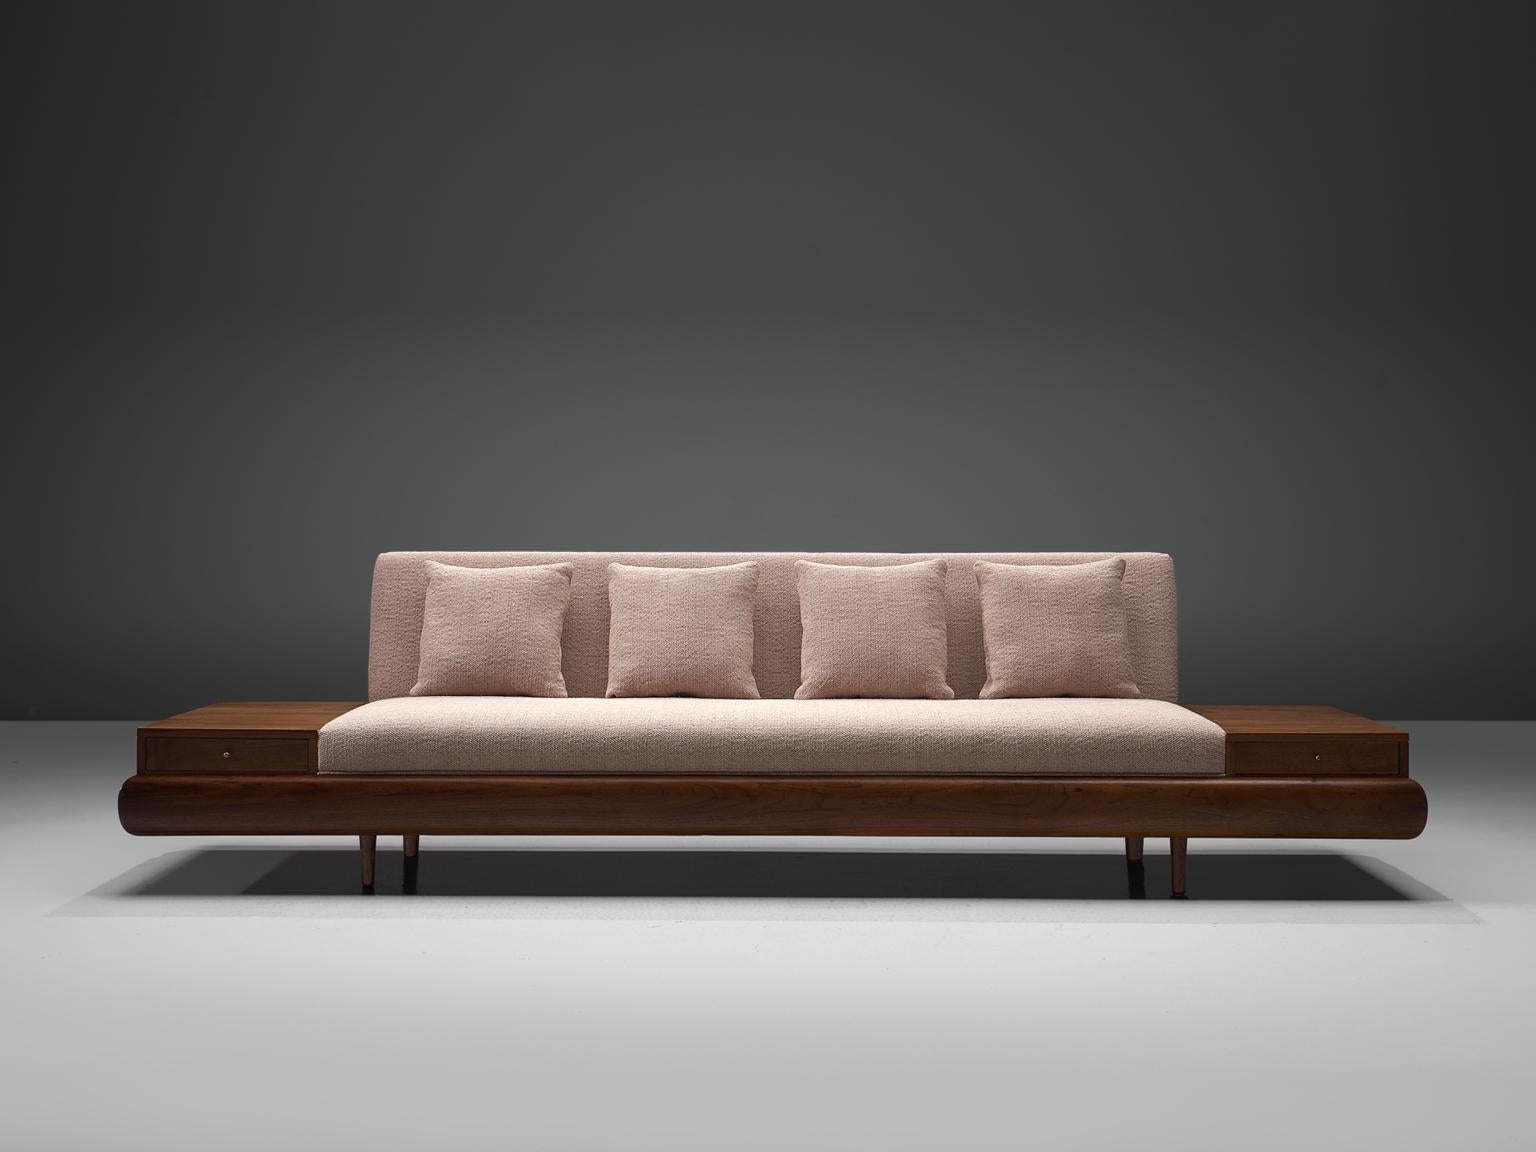 Adrian Pearsall, 'Platforn' sofa, in soft pink fabric and walnut, United States, 1960s

This Classic, soft shaped sofa has a unique feel and although it is straight and simplistic it also shows soft, delicate lines and shapes. The sofa has a